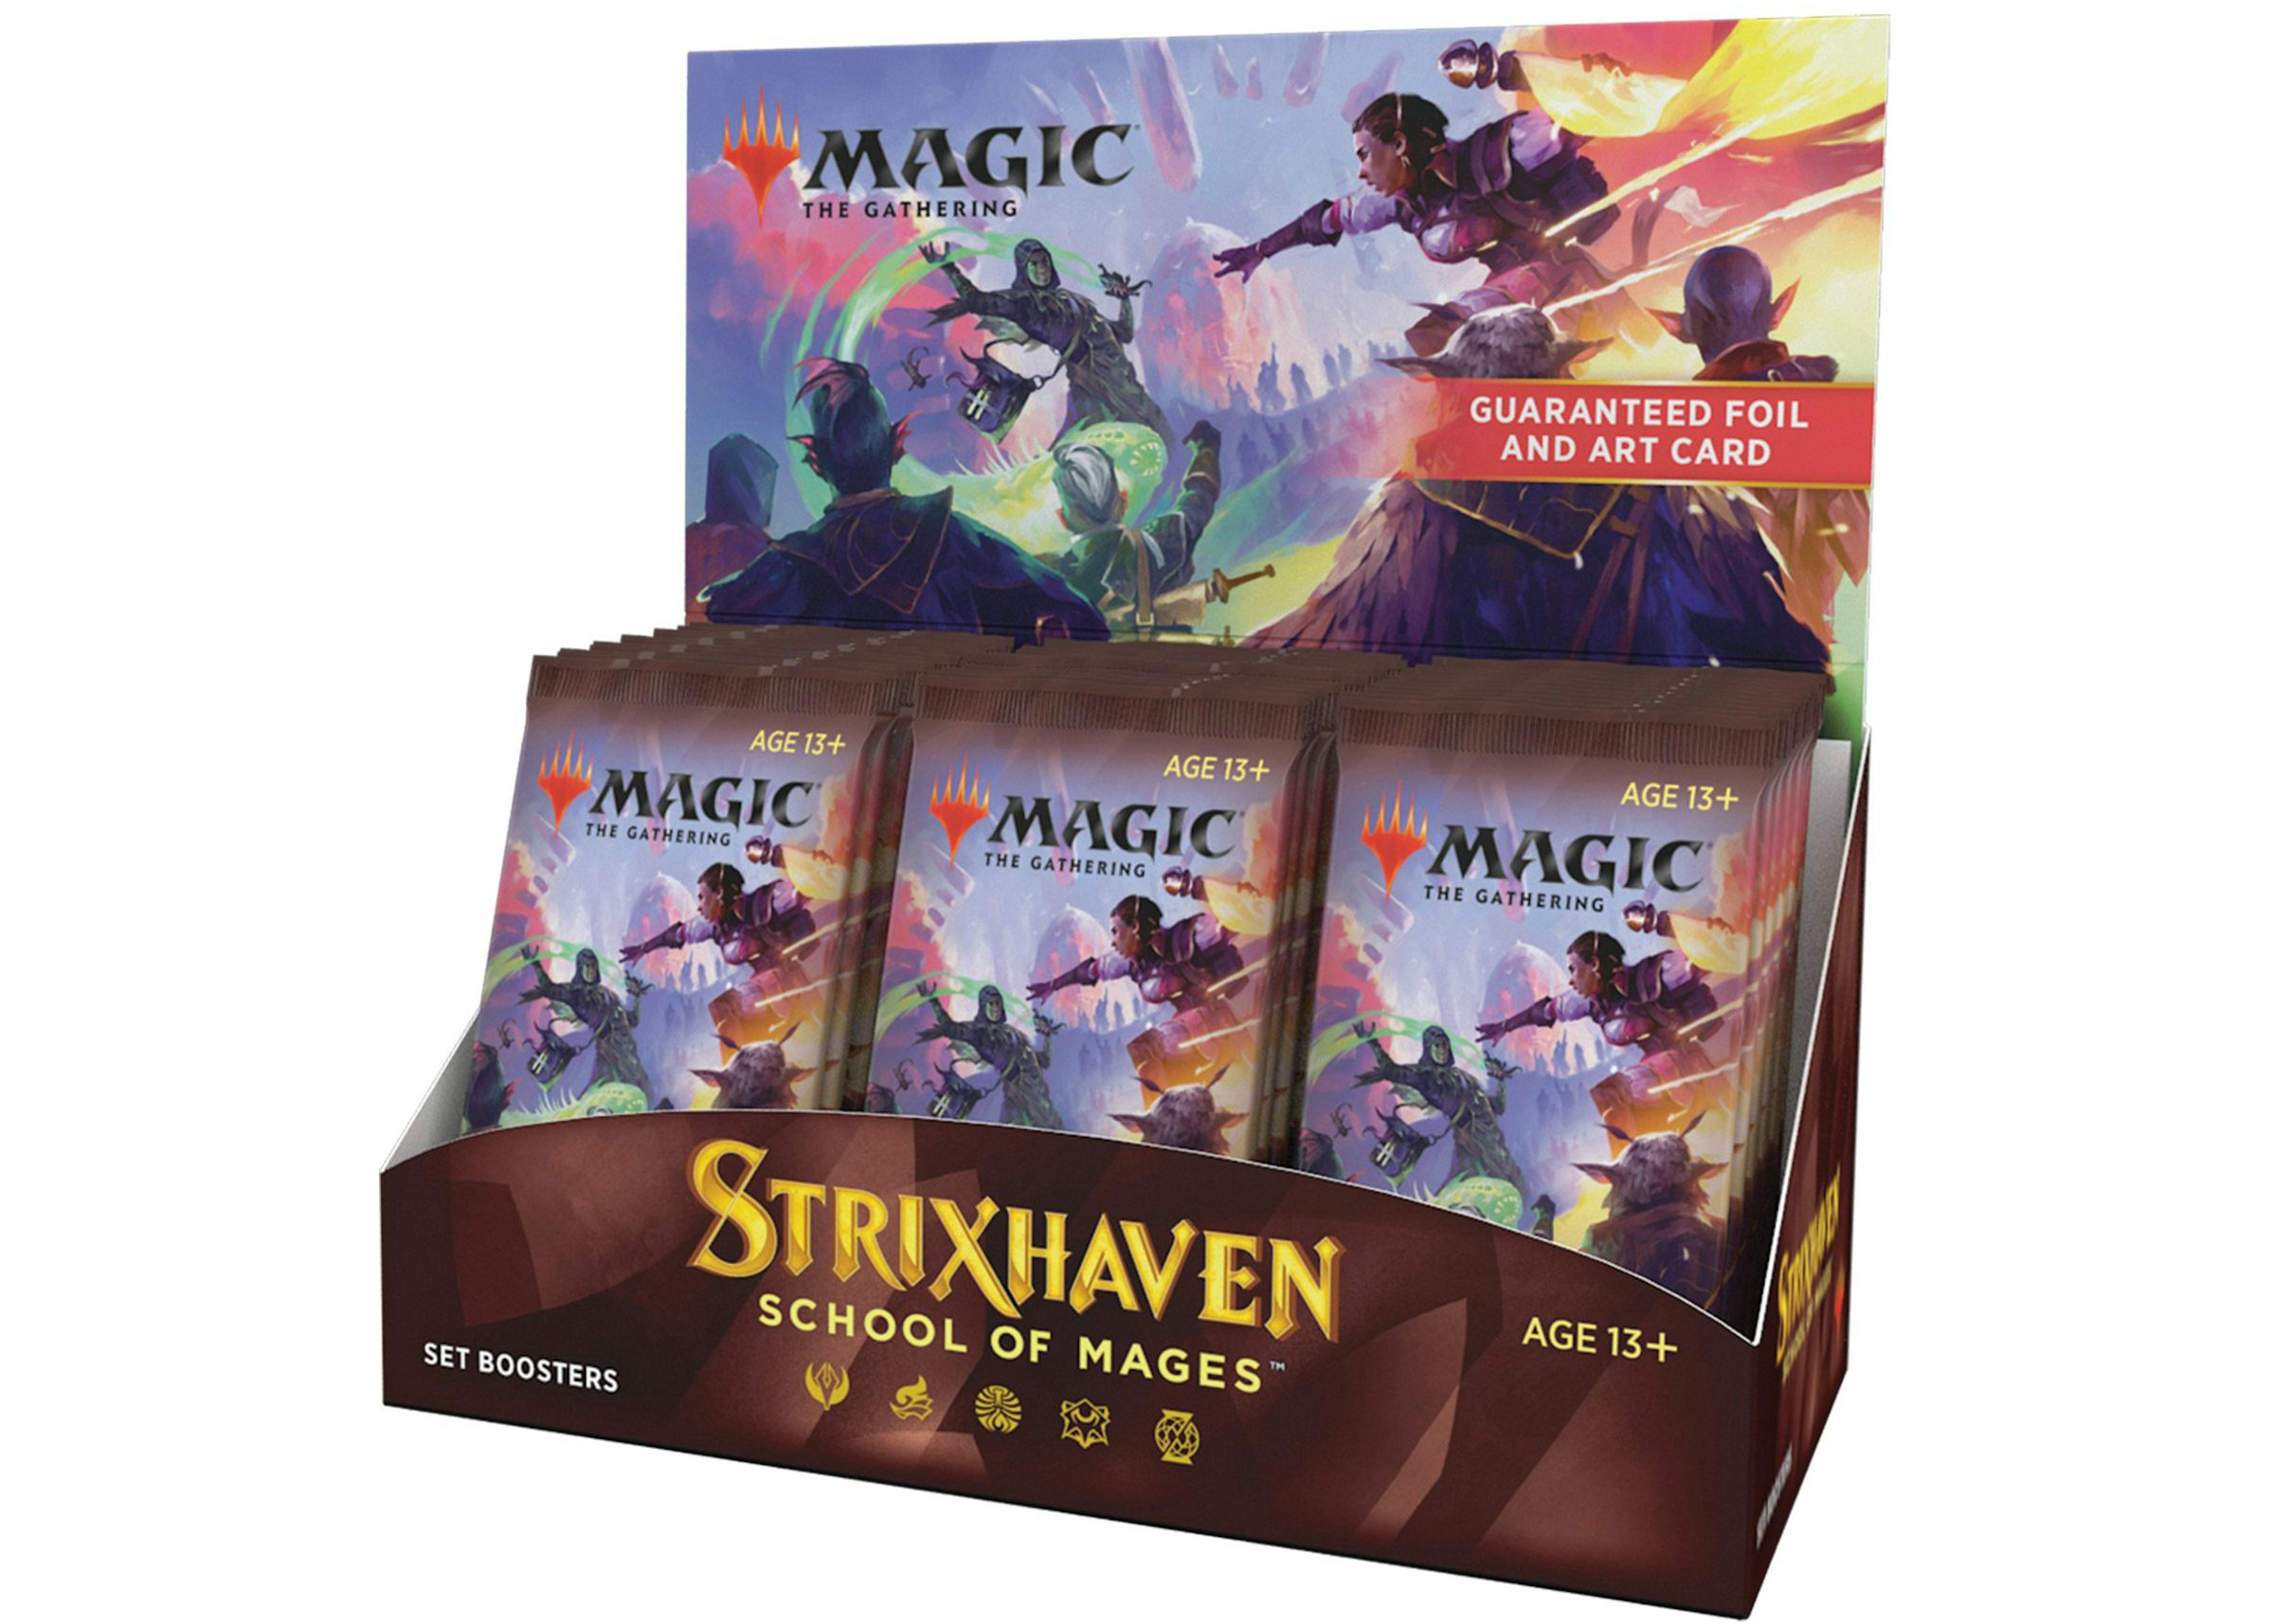 Magic: The Gathering TCG Strixhaven School of Mages Set Booster Box - IT